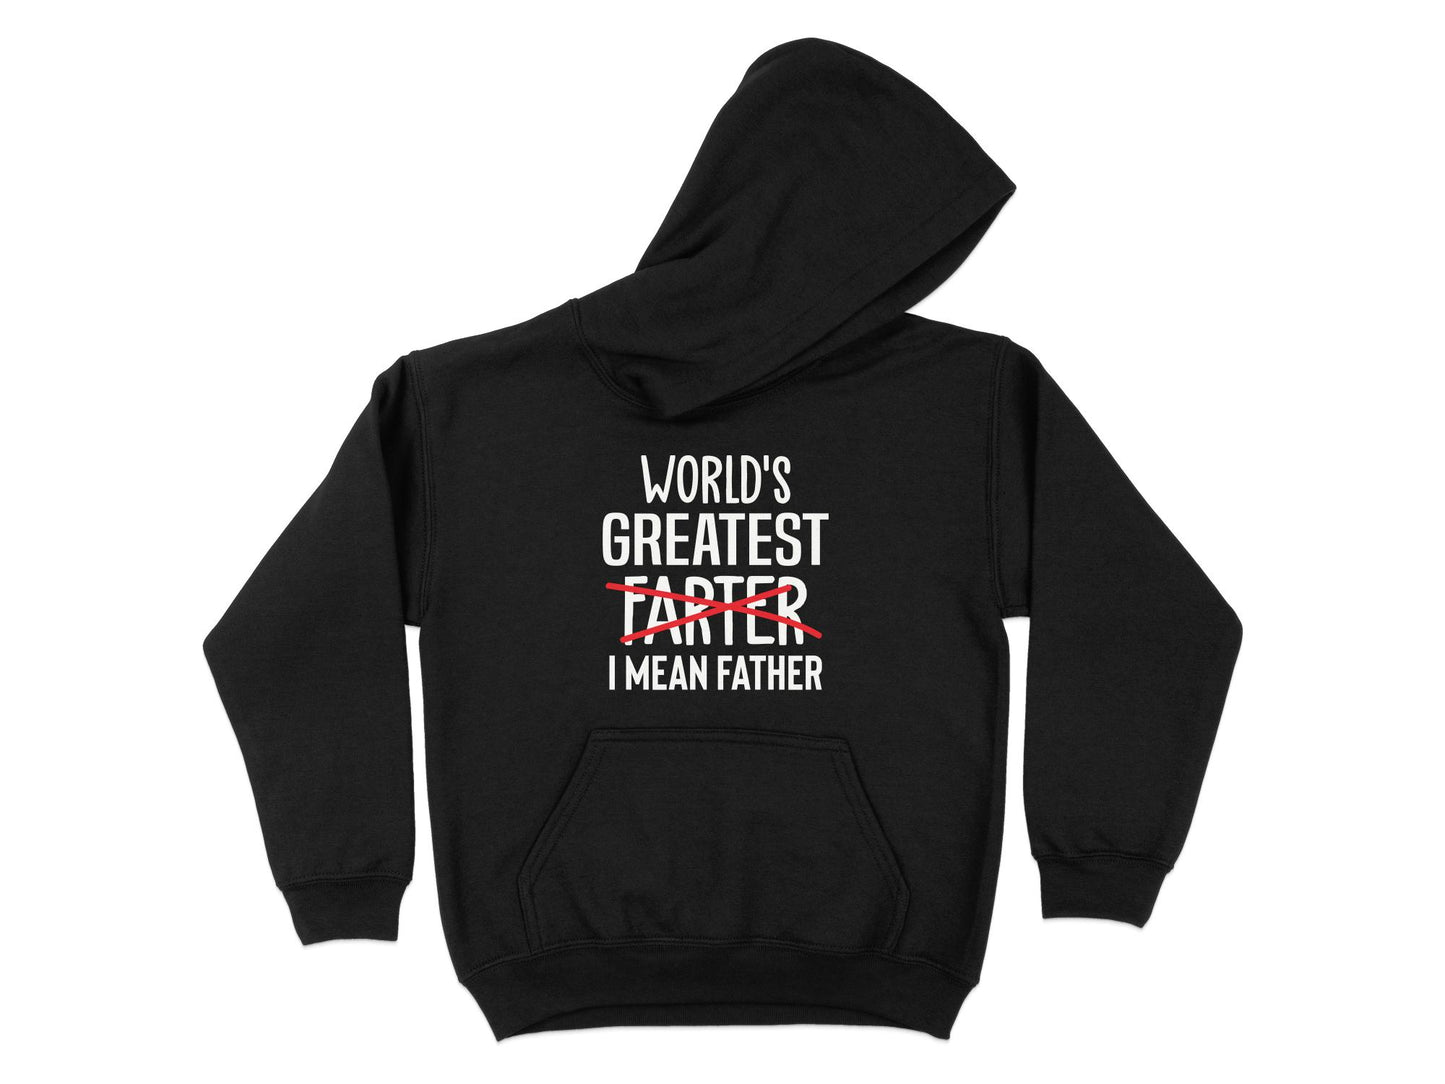 World's Greatest Farter I Mean Father Hoodie, black